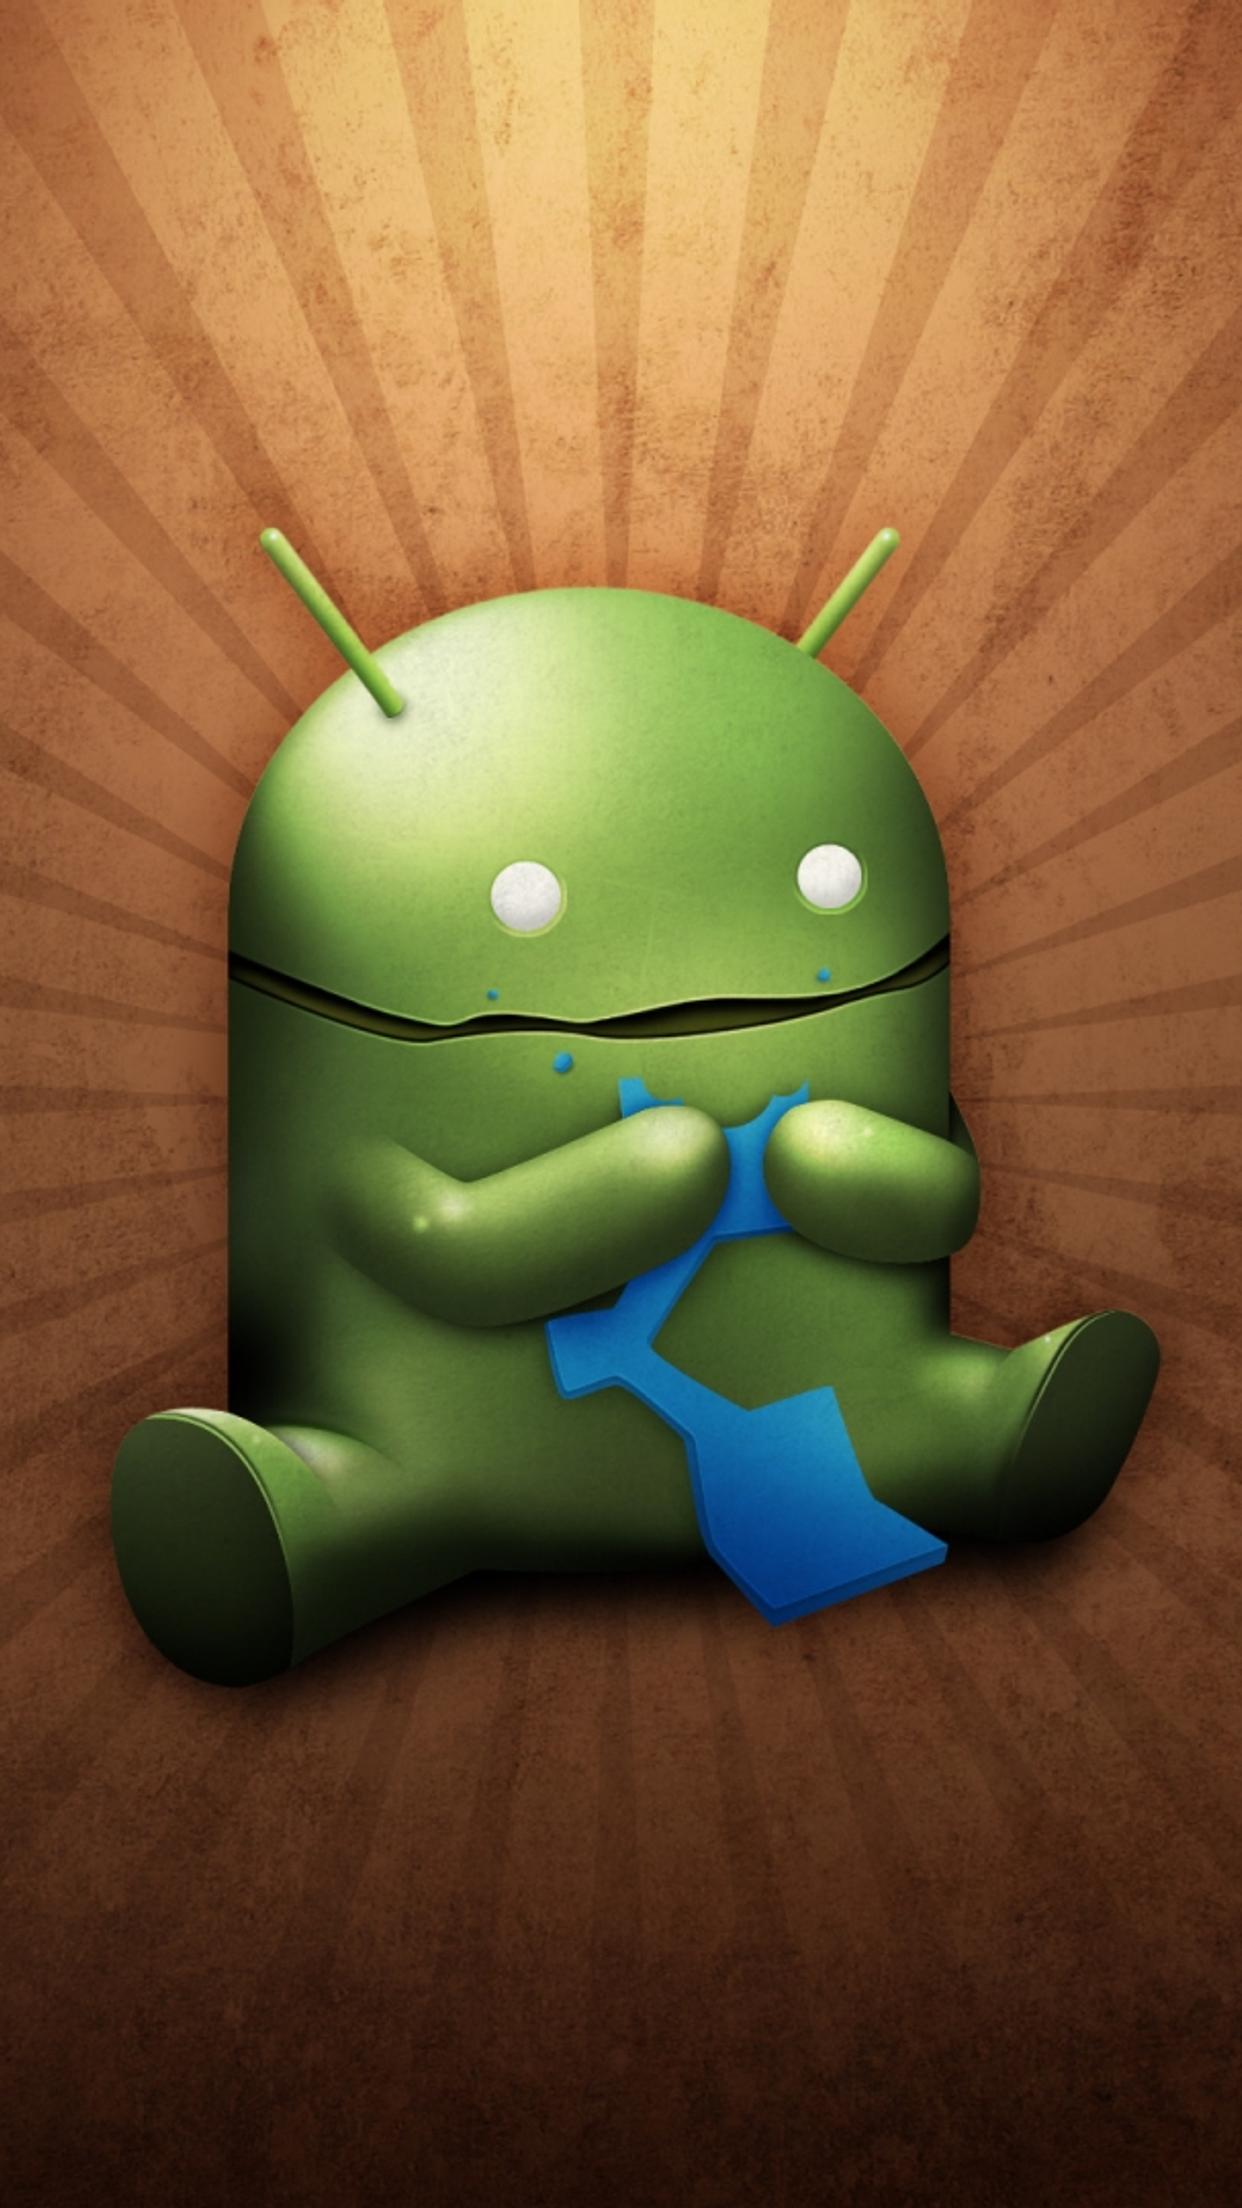 Funny android logo eating - HD wallpaper